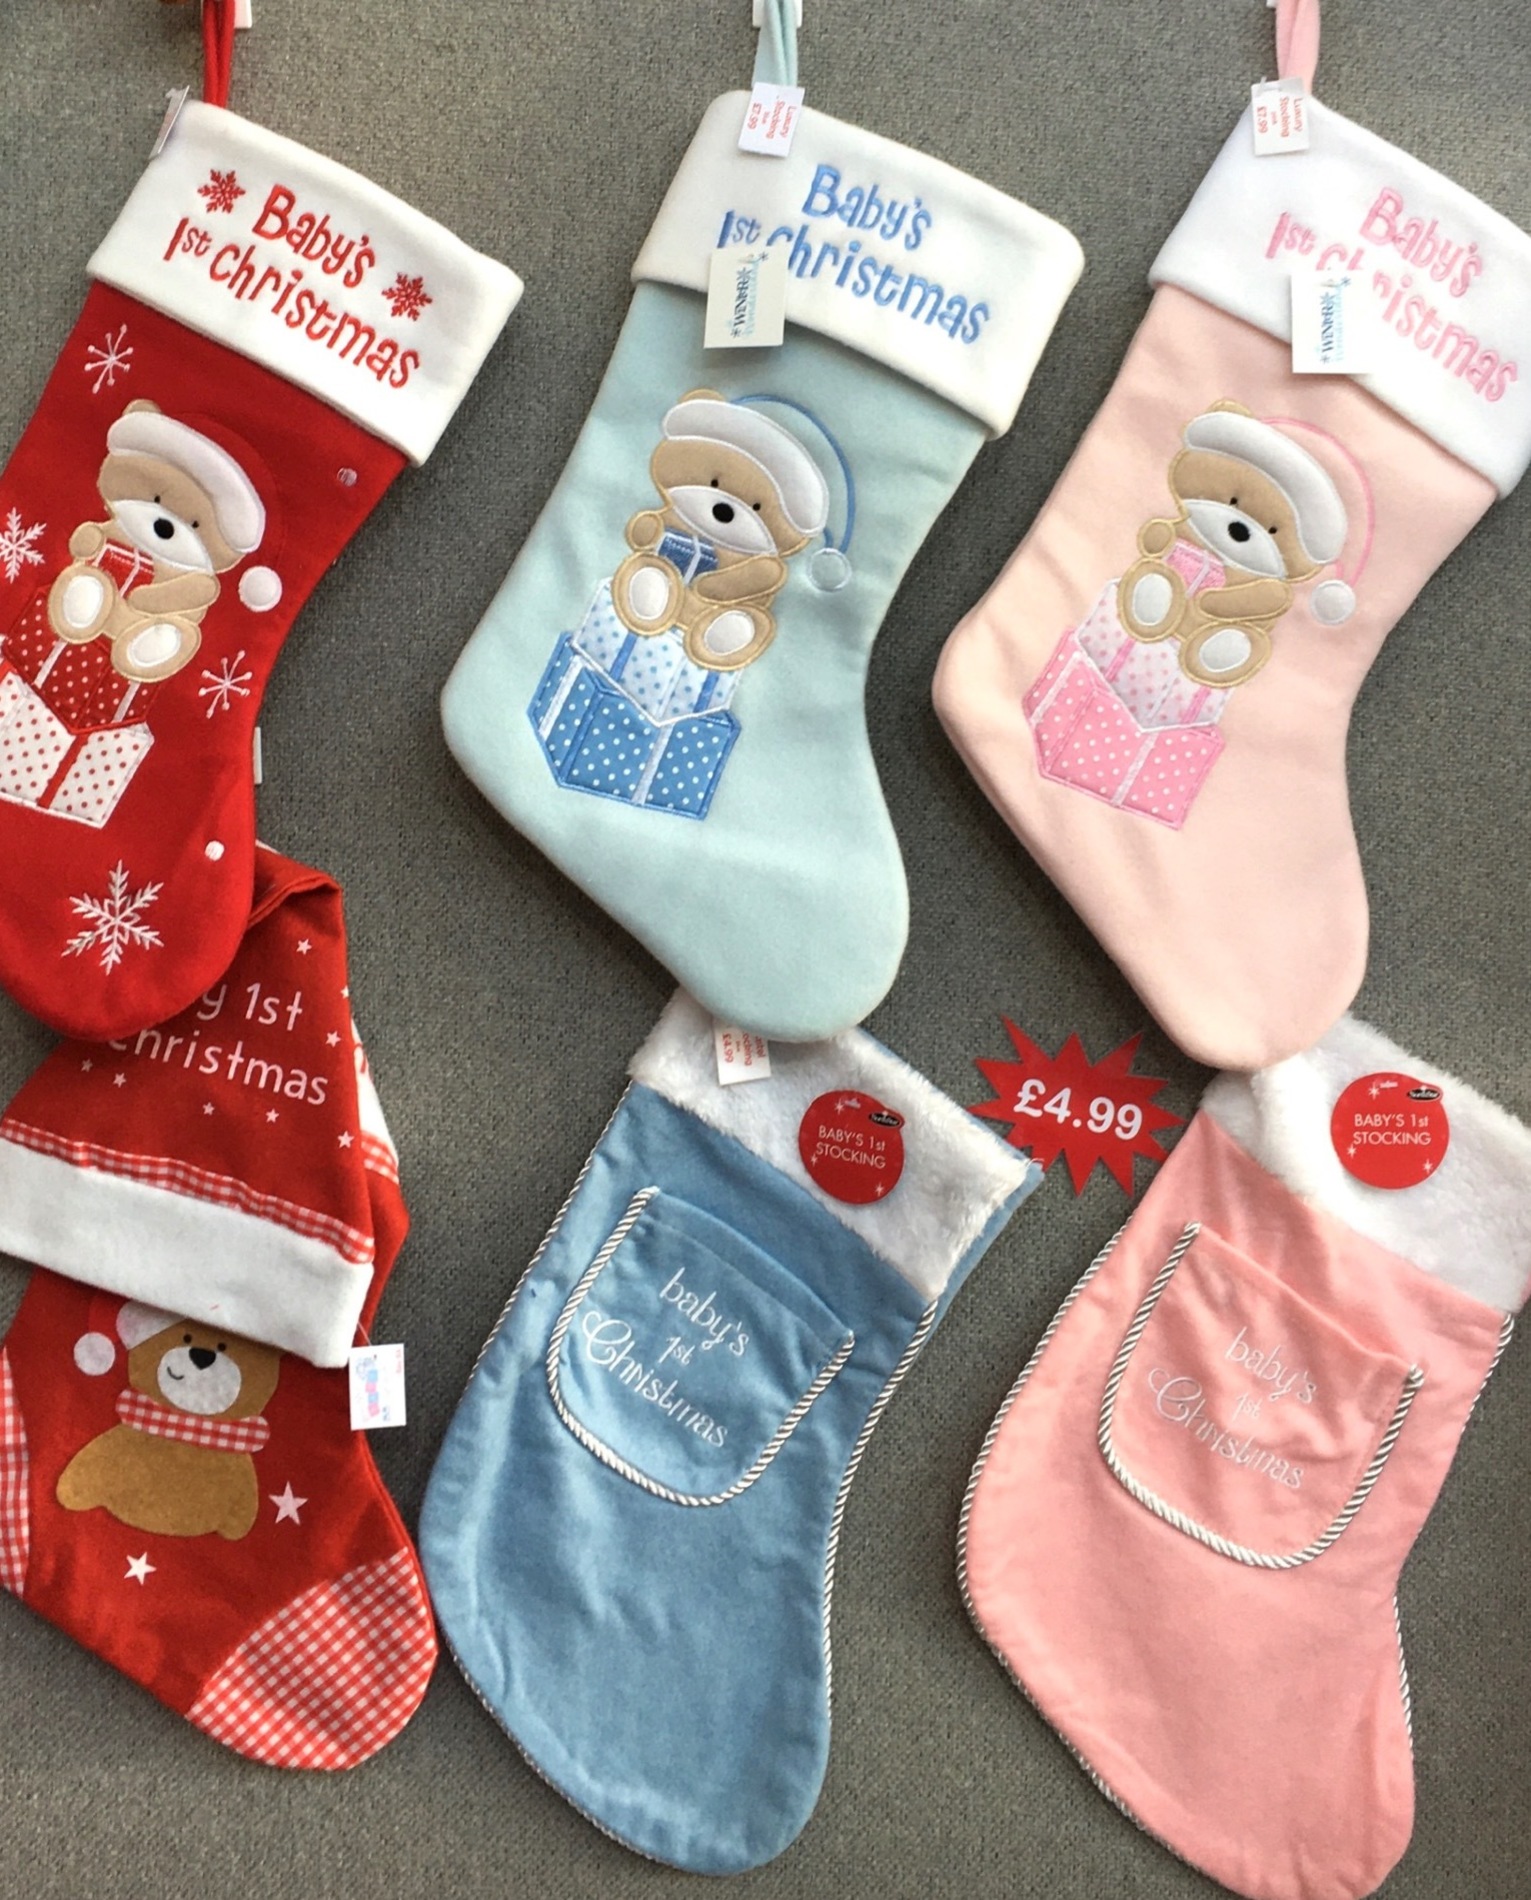 Babys First Christmas Stockings pink blue red